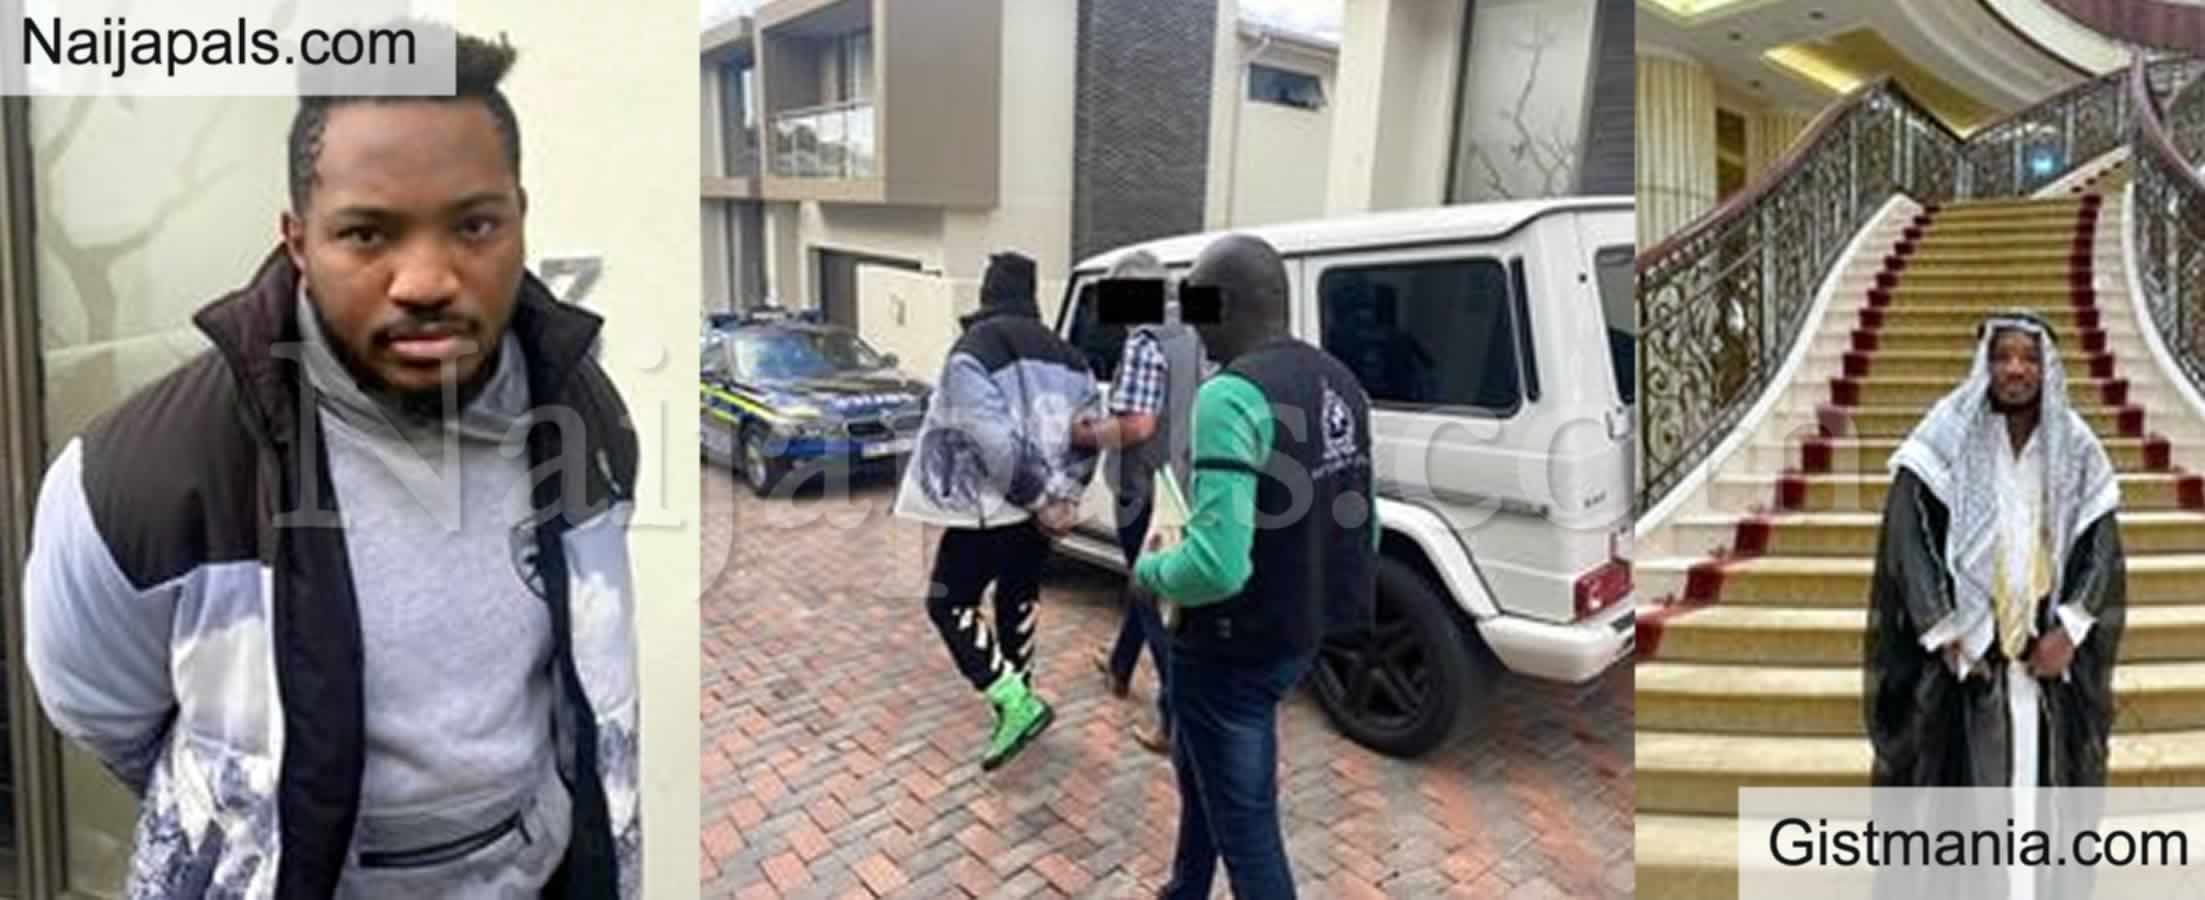 <img alt='.' class='lazyload' data-src='https://img.gistmania.com/emot/news.gif' /> <b>Nigerian Cyber Crime Lord, James Aliyu Arrested In South Africa Over $12M BEC Scam</b>